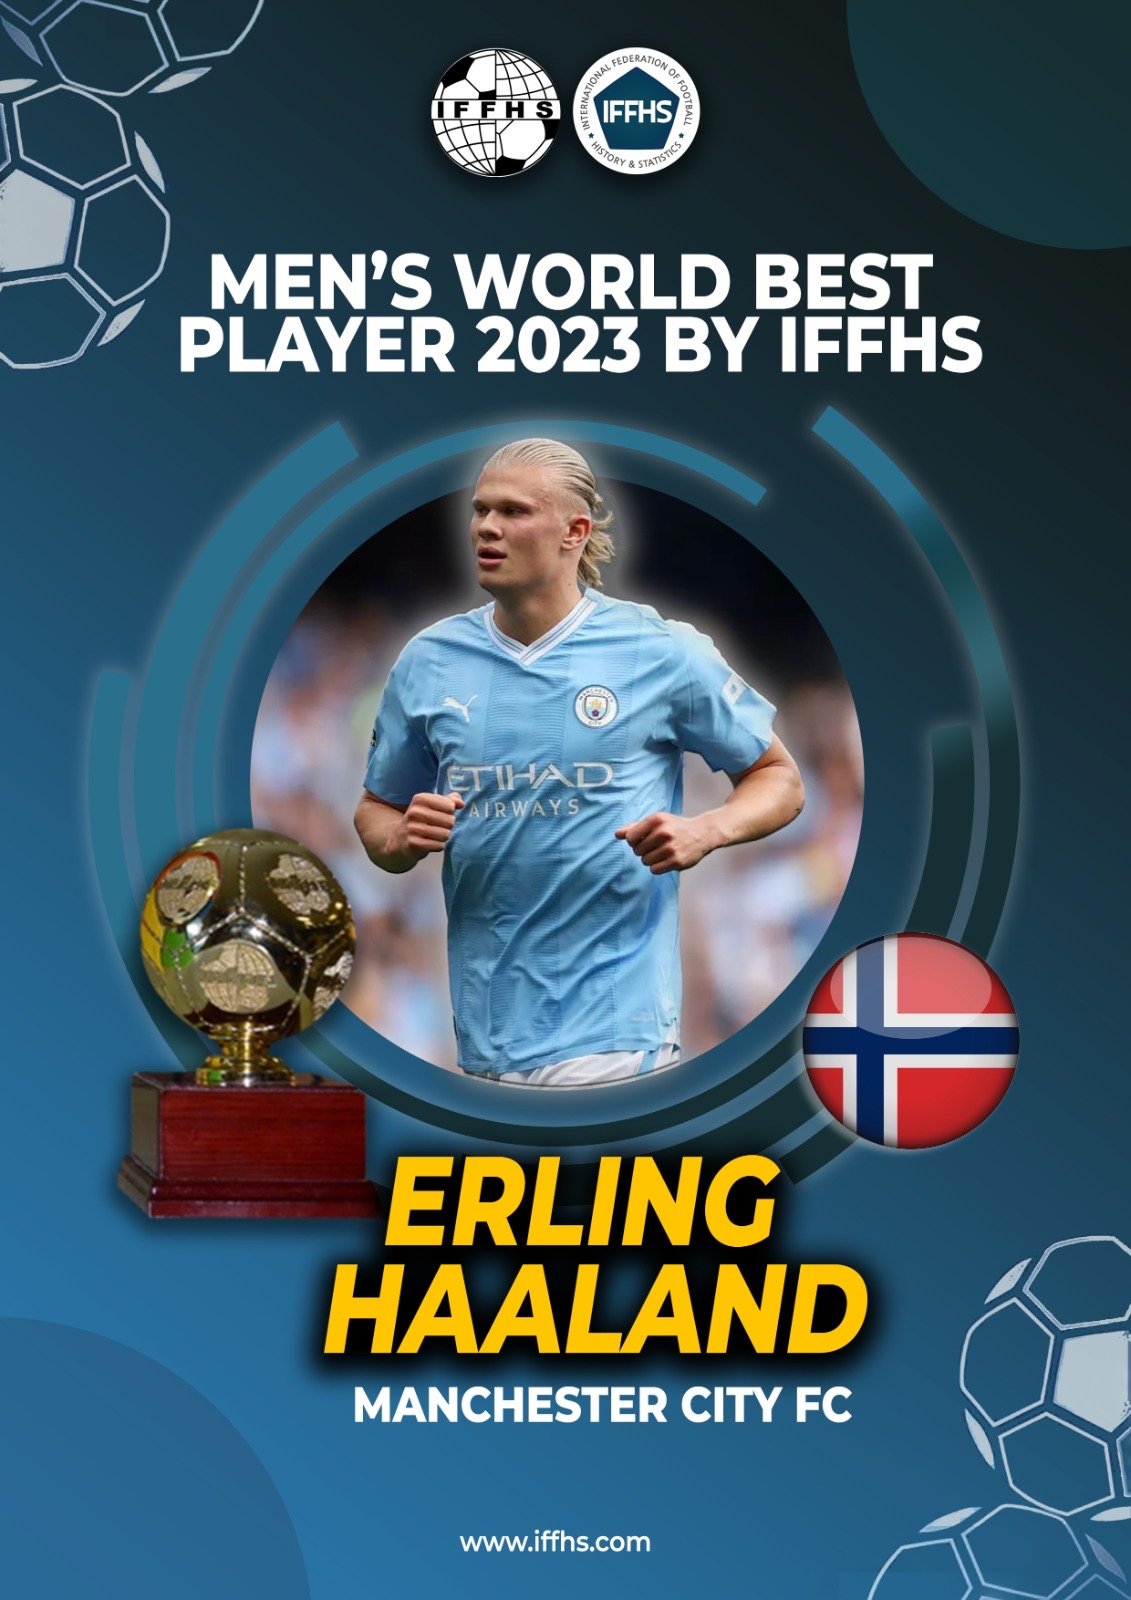 IFFHS on X: "IFFHS MEN'S WORLD BEST PLAYER 2023 AWARDS 2023 - ERLING HAALAND,  THE WORLD'S BEST PLAYER 2023! For more information, visit the website:  https://t.co/sAKgUkGtcm #iffhs_news #awards #history #statistics #world_cup  #winners #